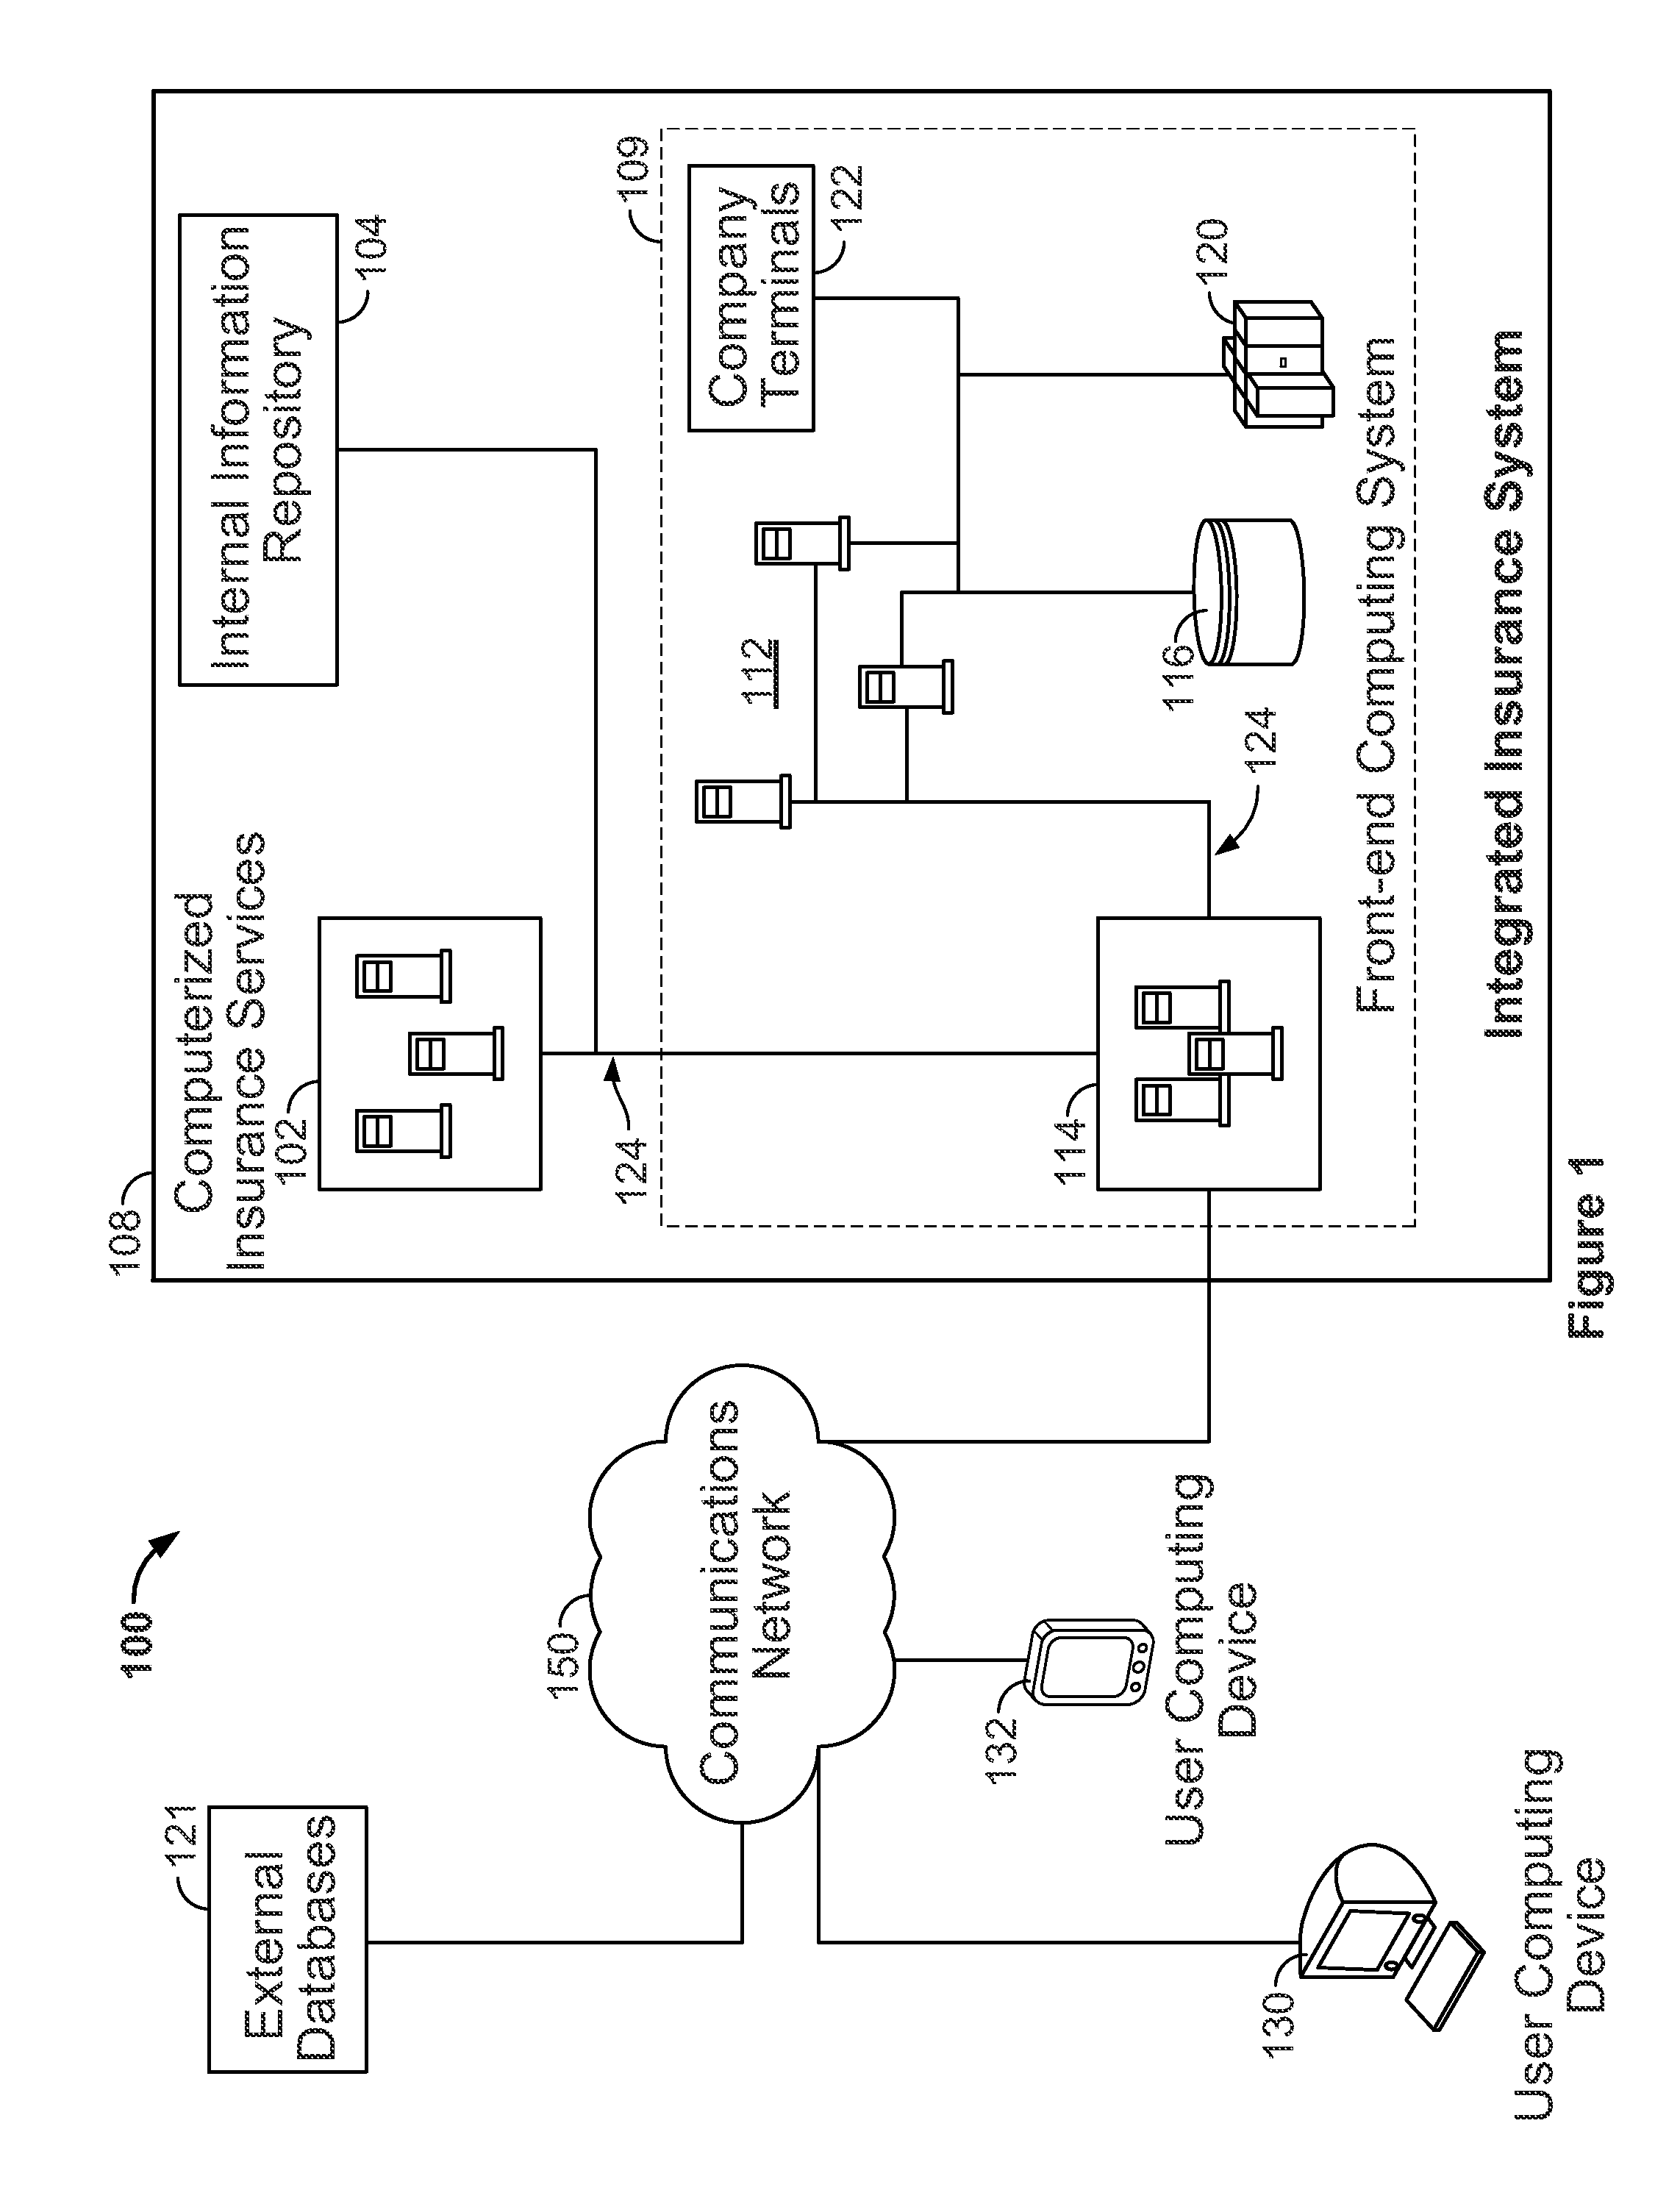 System and method for providing dynamic insurance portal transaction authentication and authorization